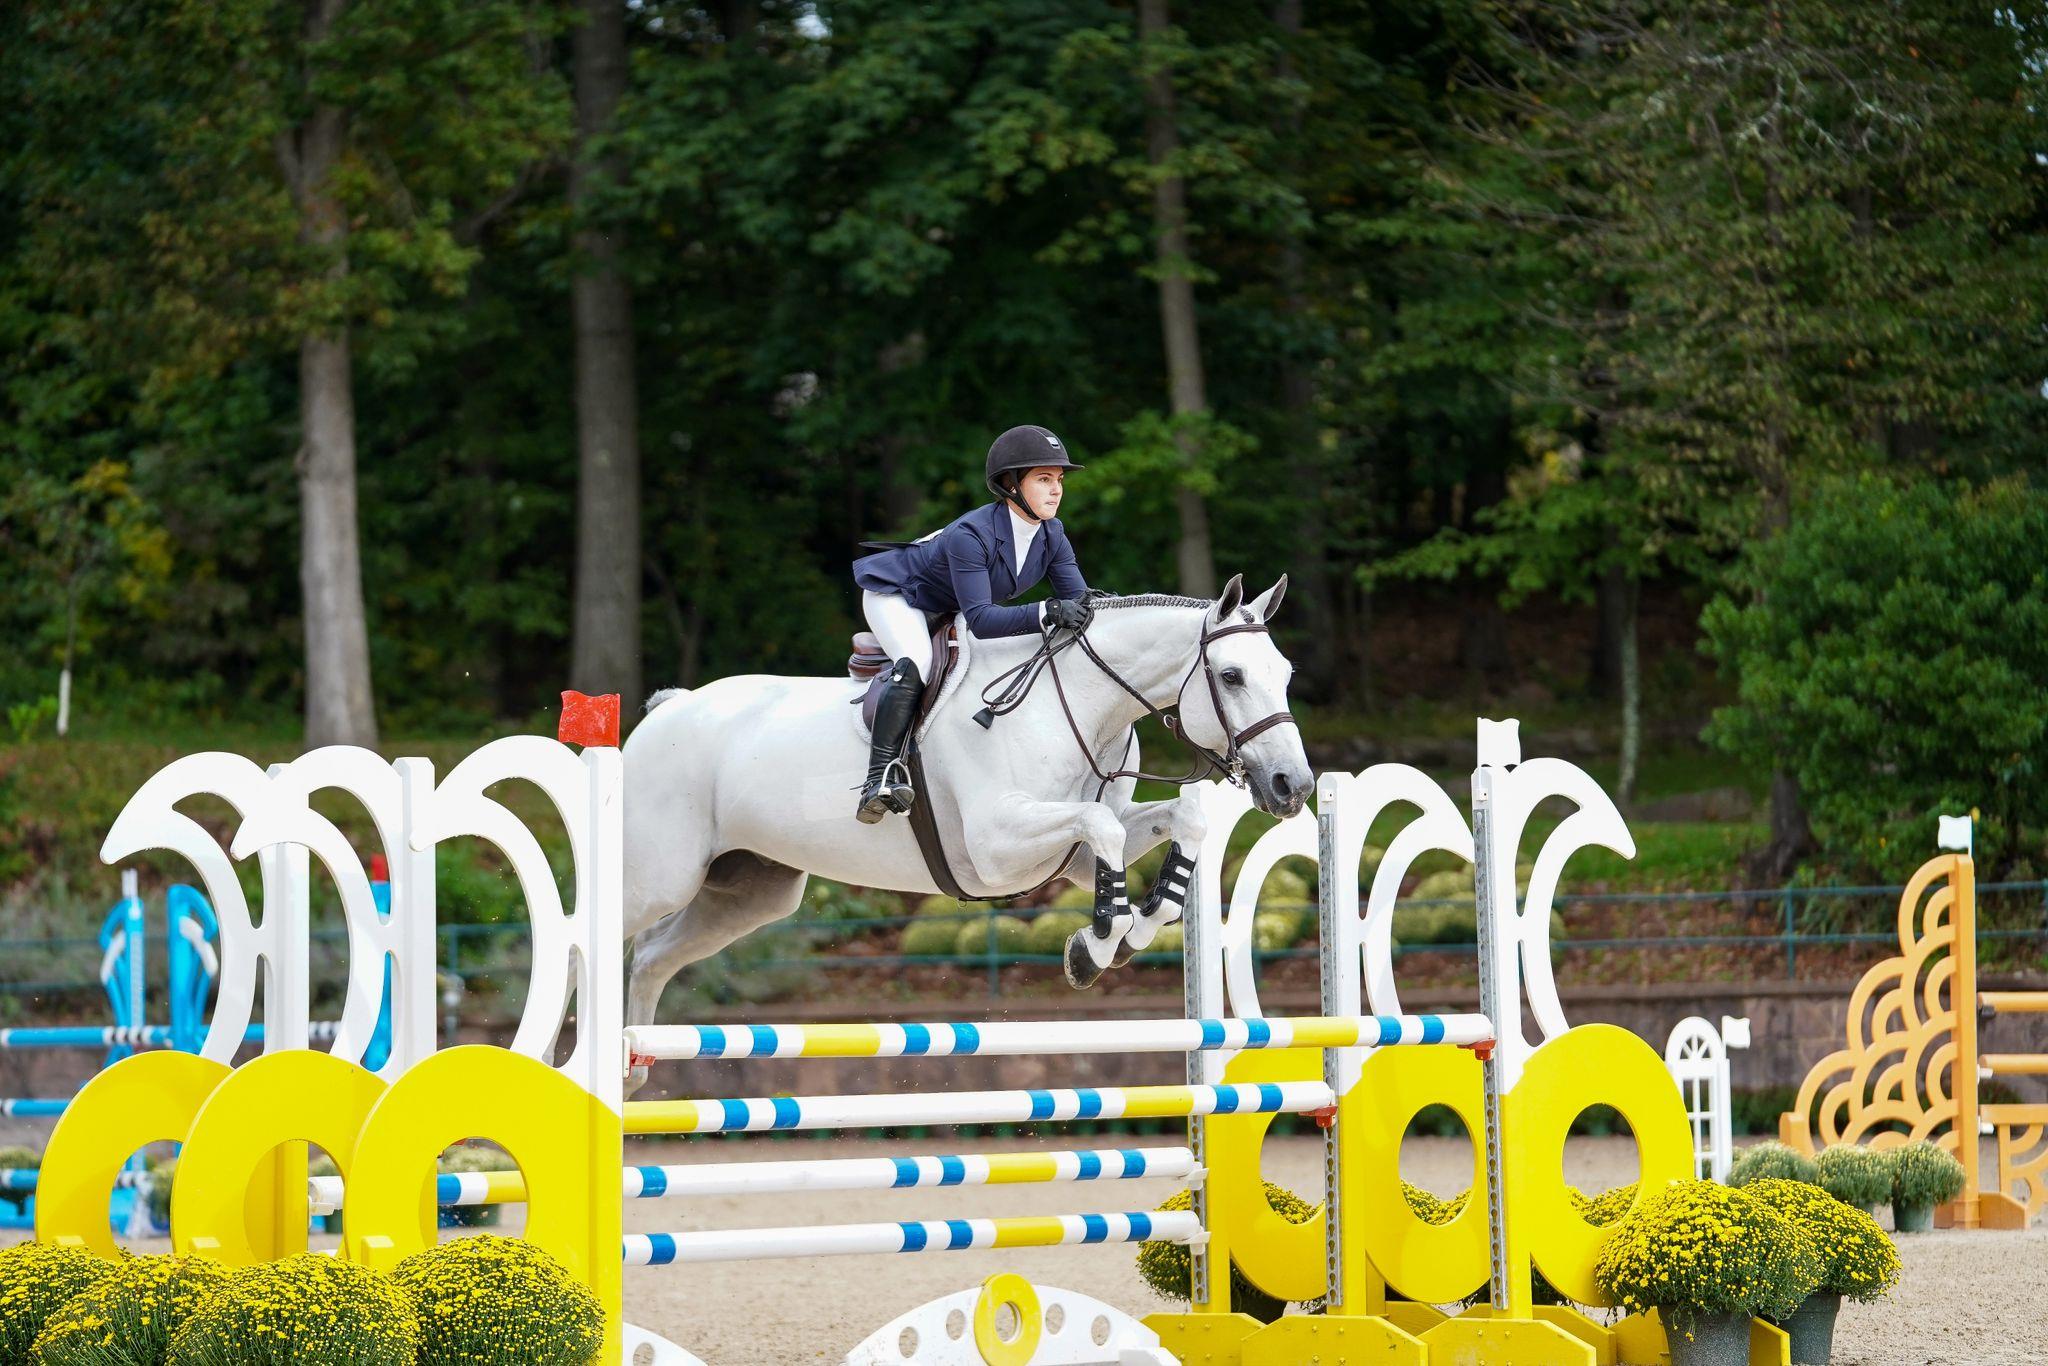 Photo showcasing the Platinum Performance/USEF Show Jumping Talent Search Final-East